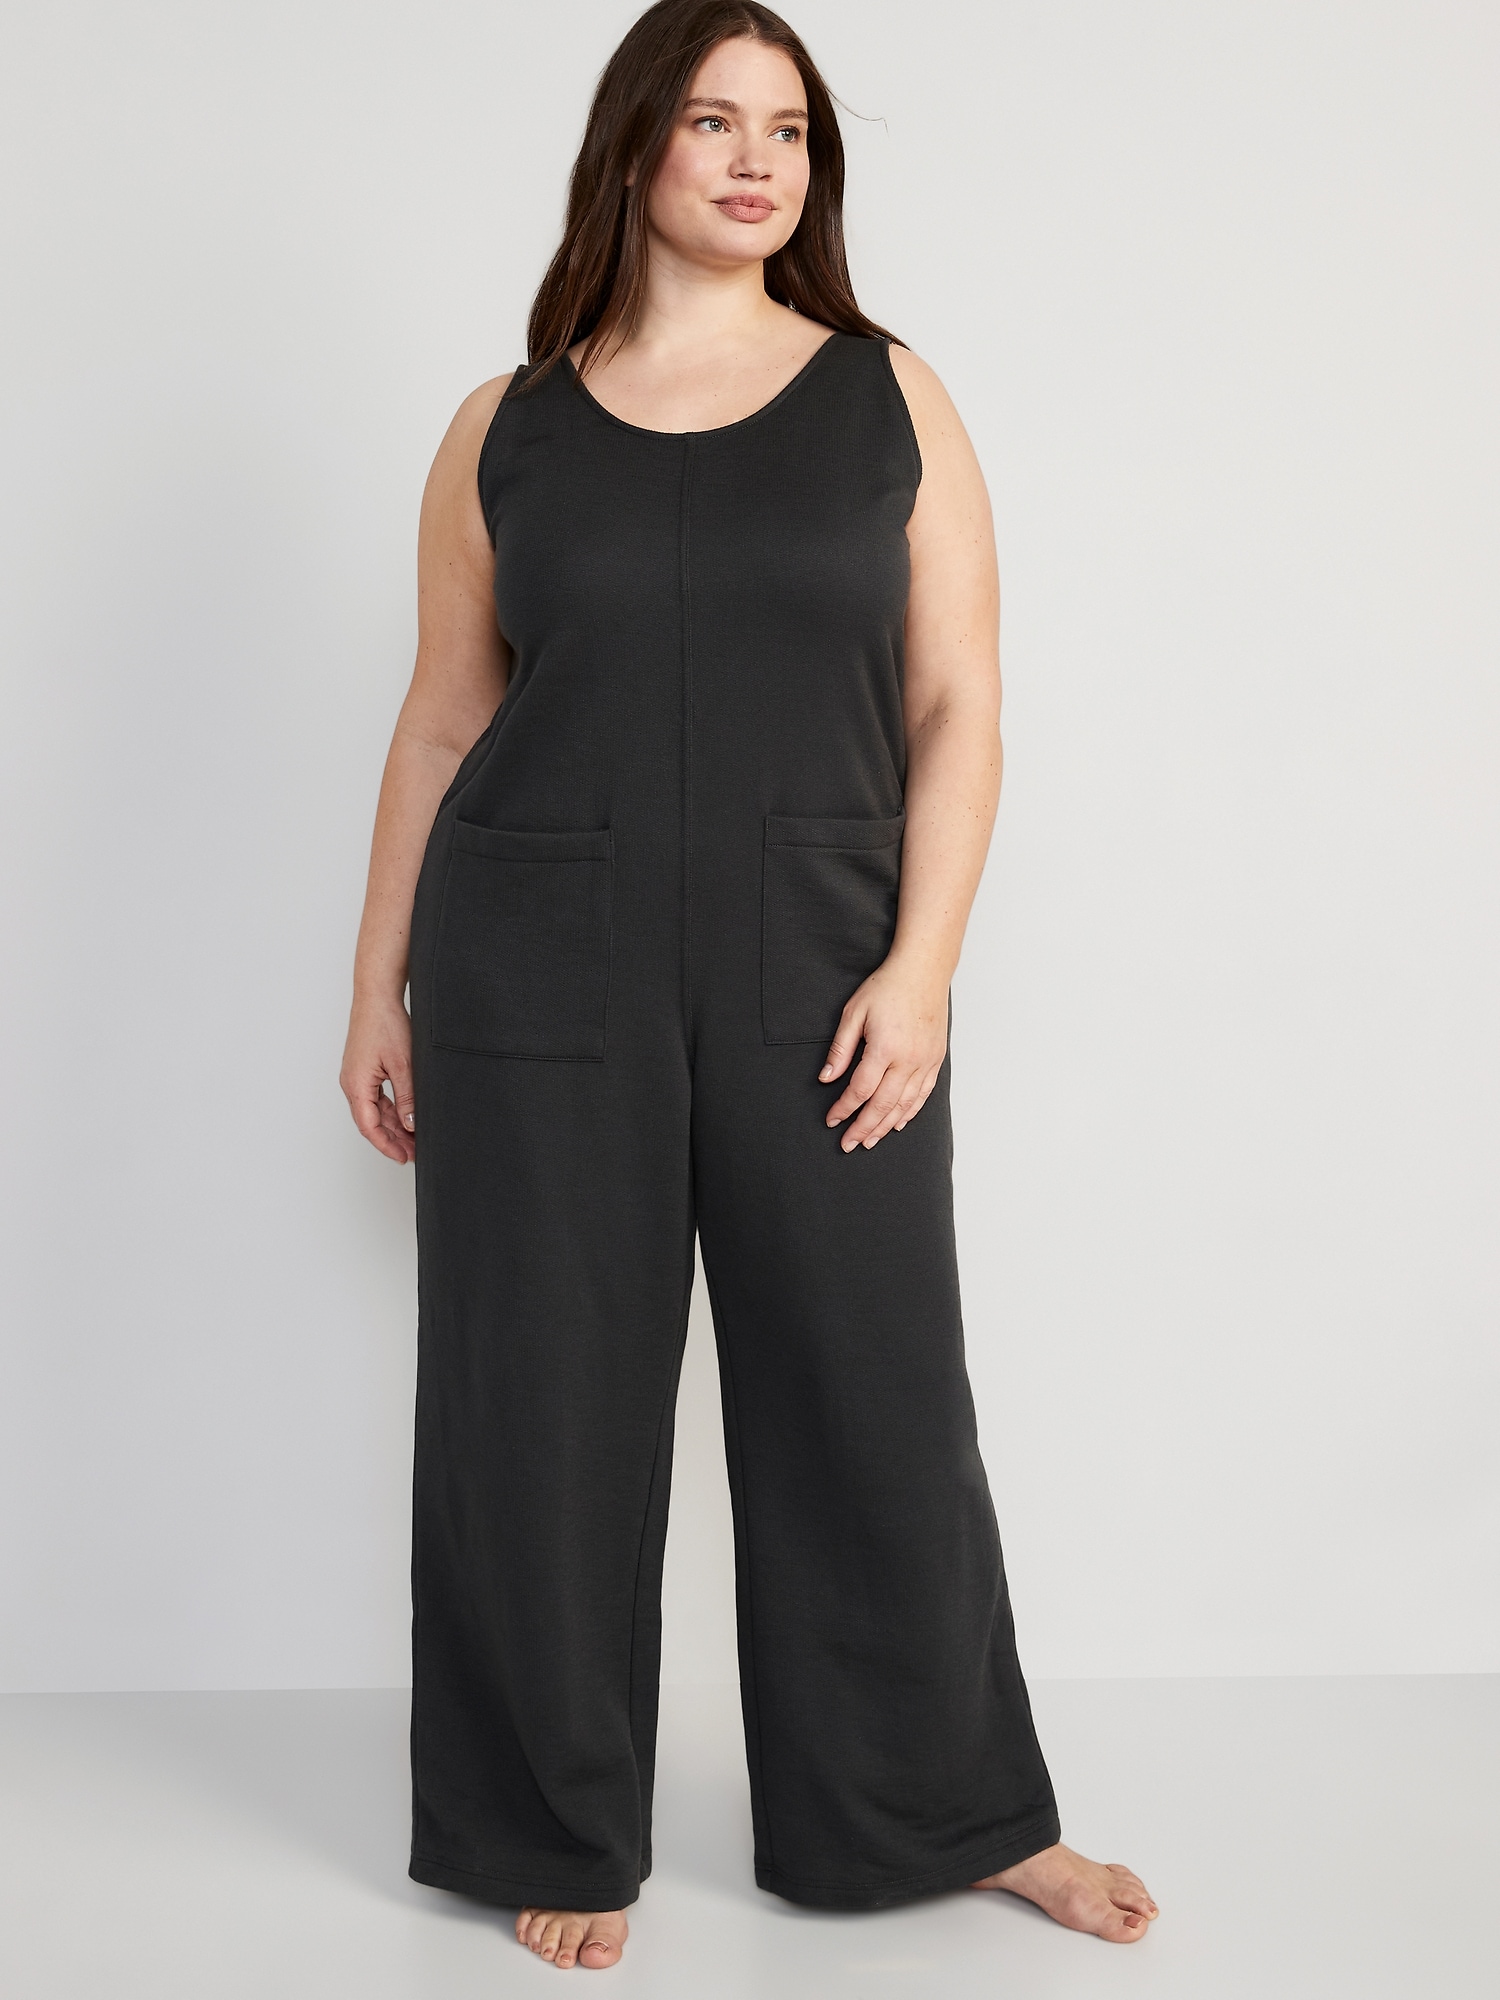 Sleeveless Loose Marled Fleece Lounge Jumpsuit for Women | Old Navy